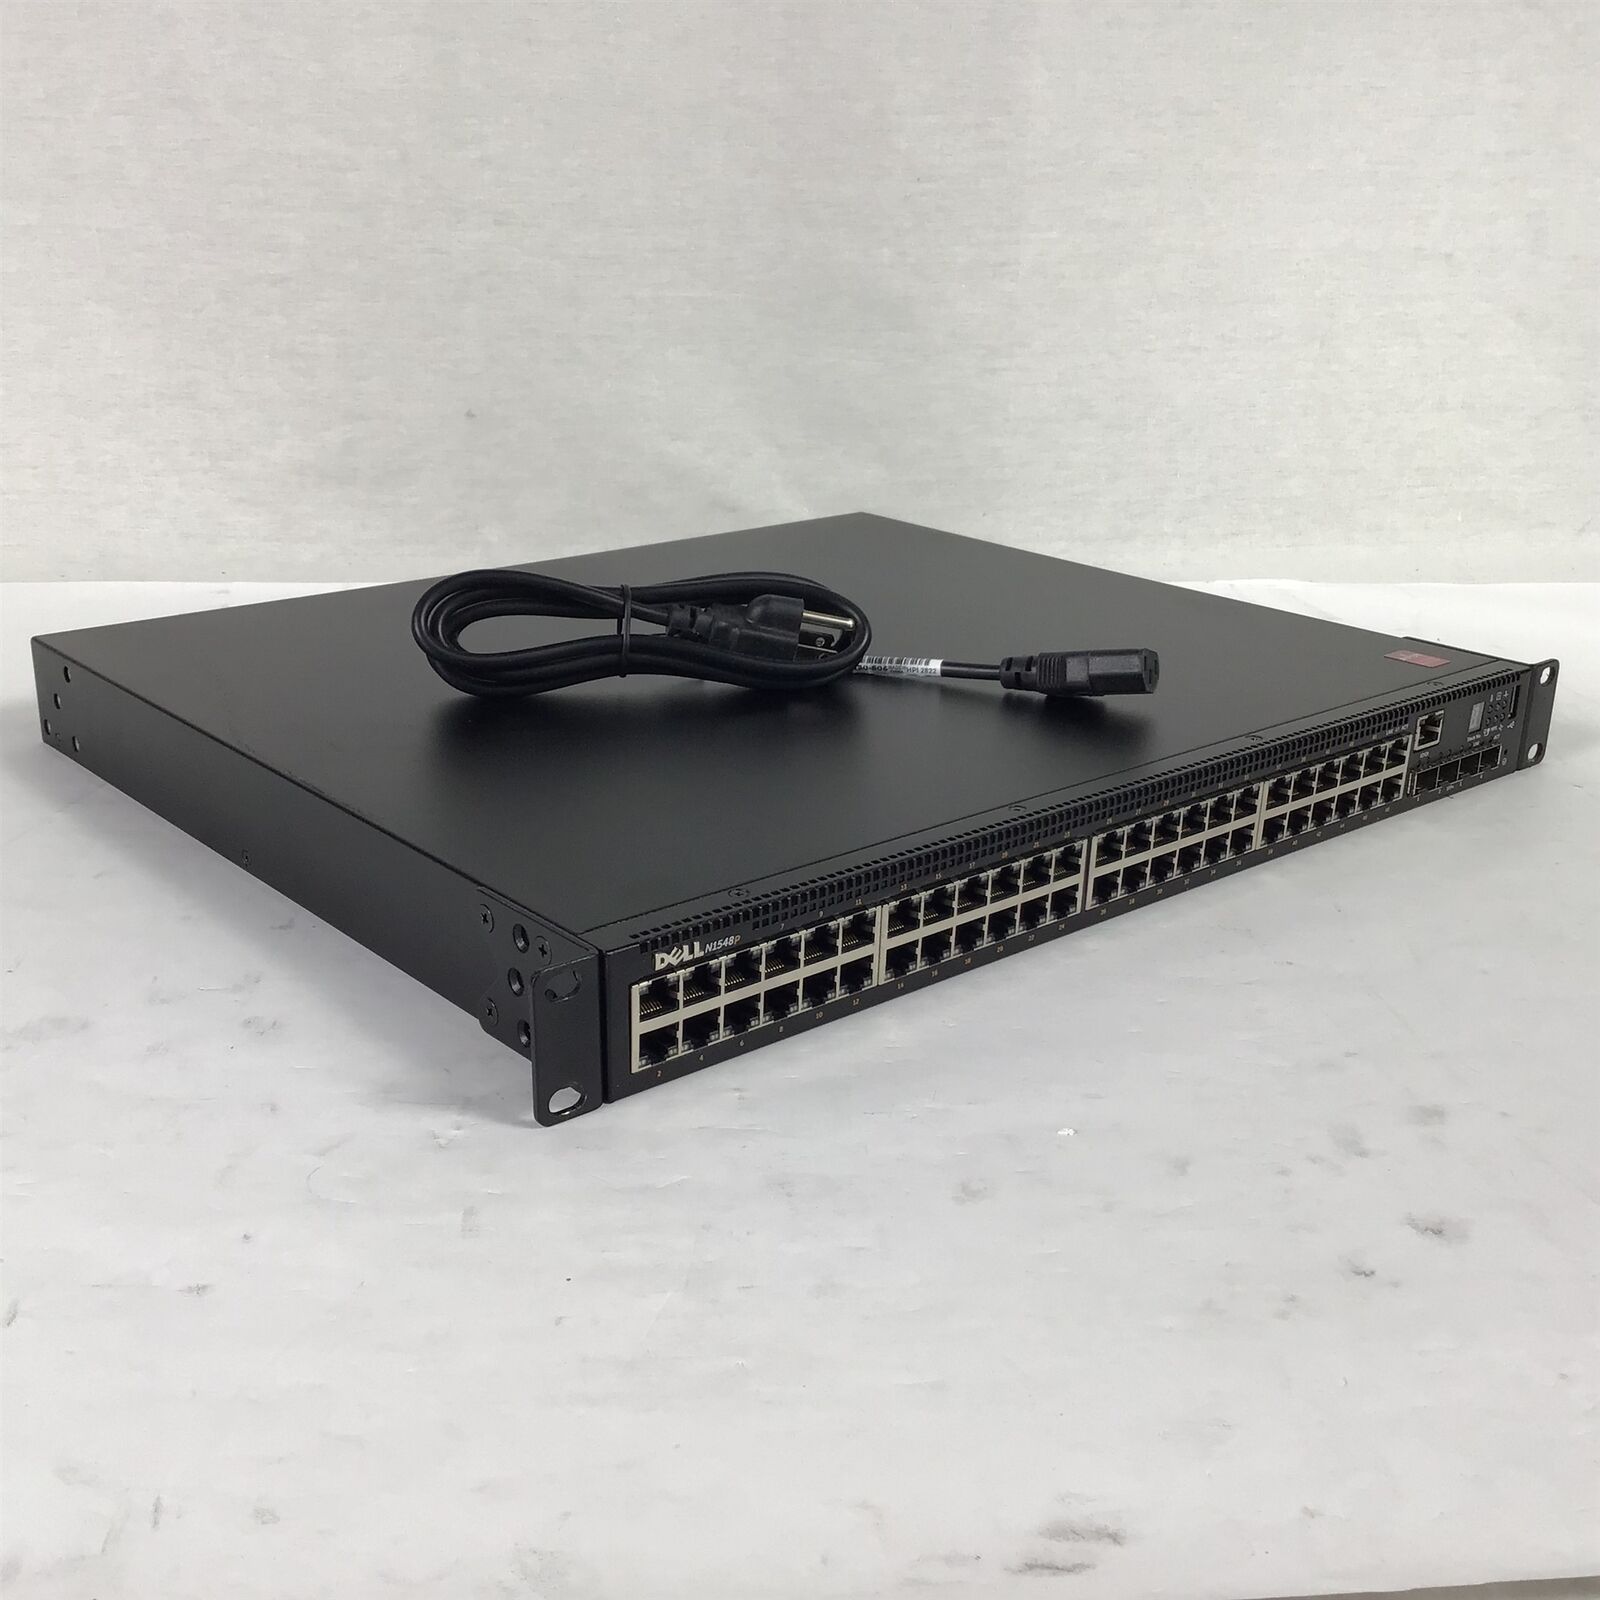 Dell Powerswitch N1548P PoE+ 48x 1GbE Ethernet Network Switch w/ 4x 10GbE SFP+